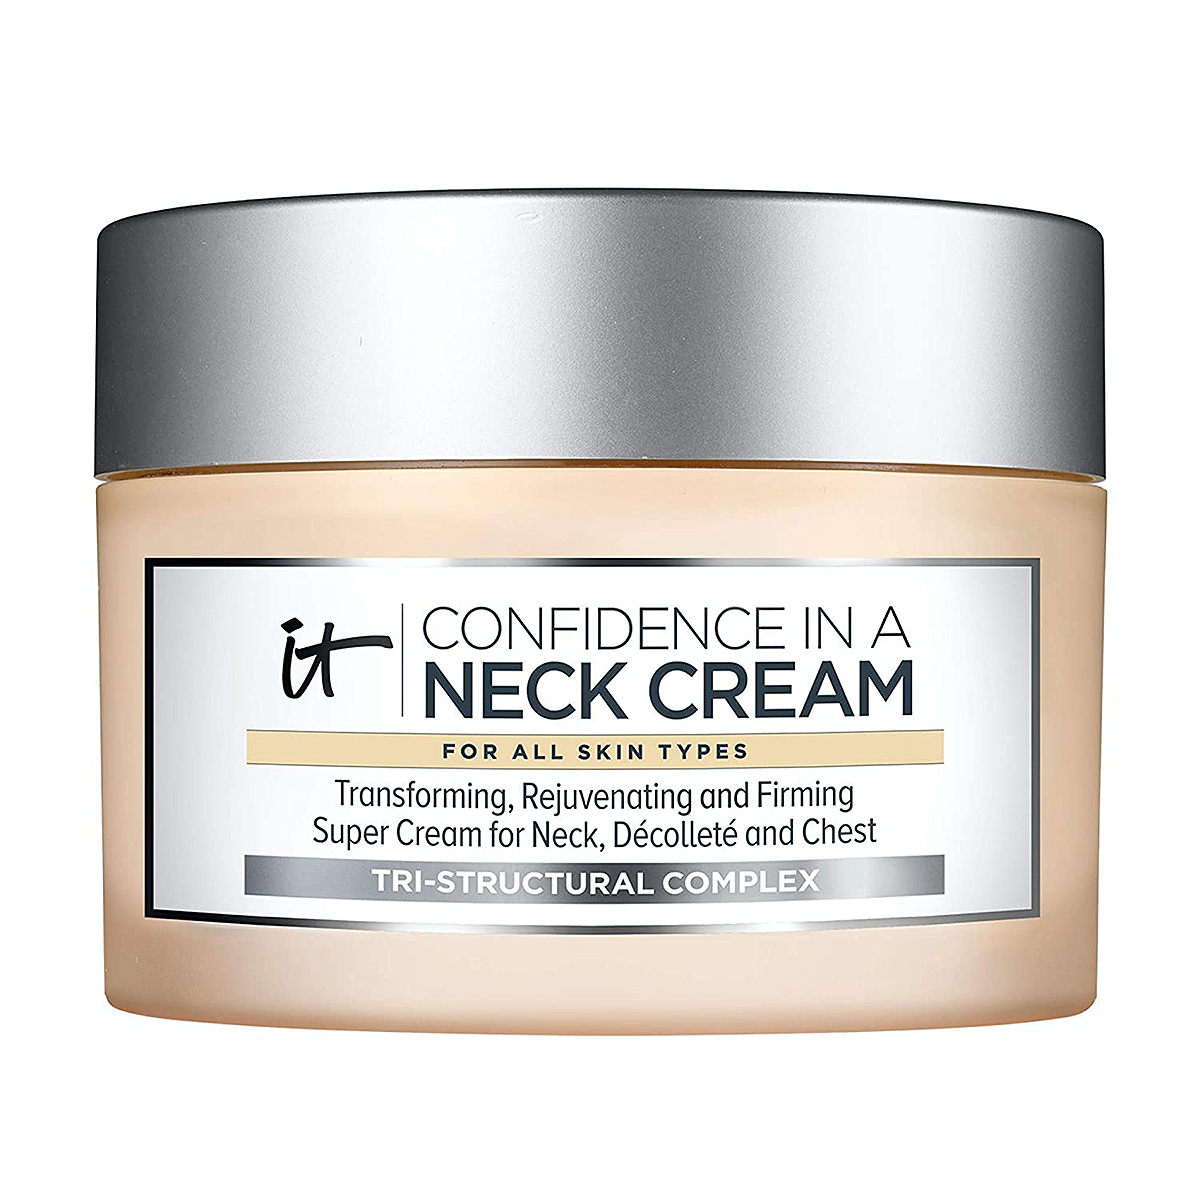 The Best Neck Creams for Firming Up Wrinkled Skin